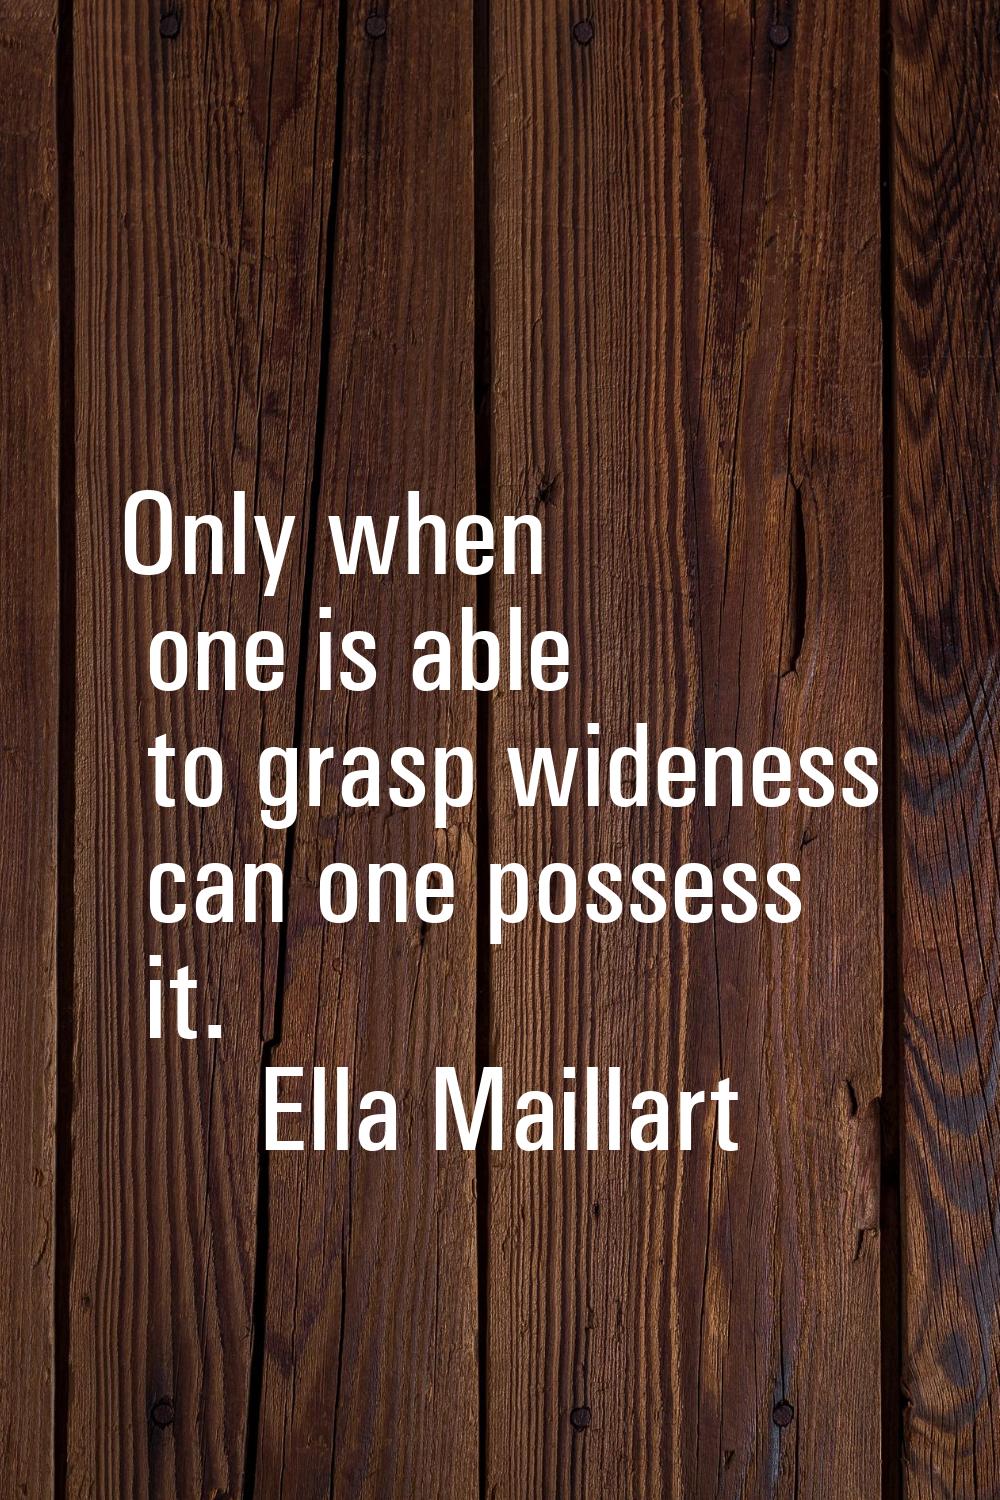 Only when one is able to grasp wideness can one possess it.